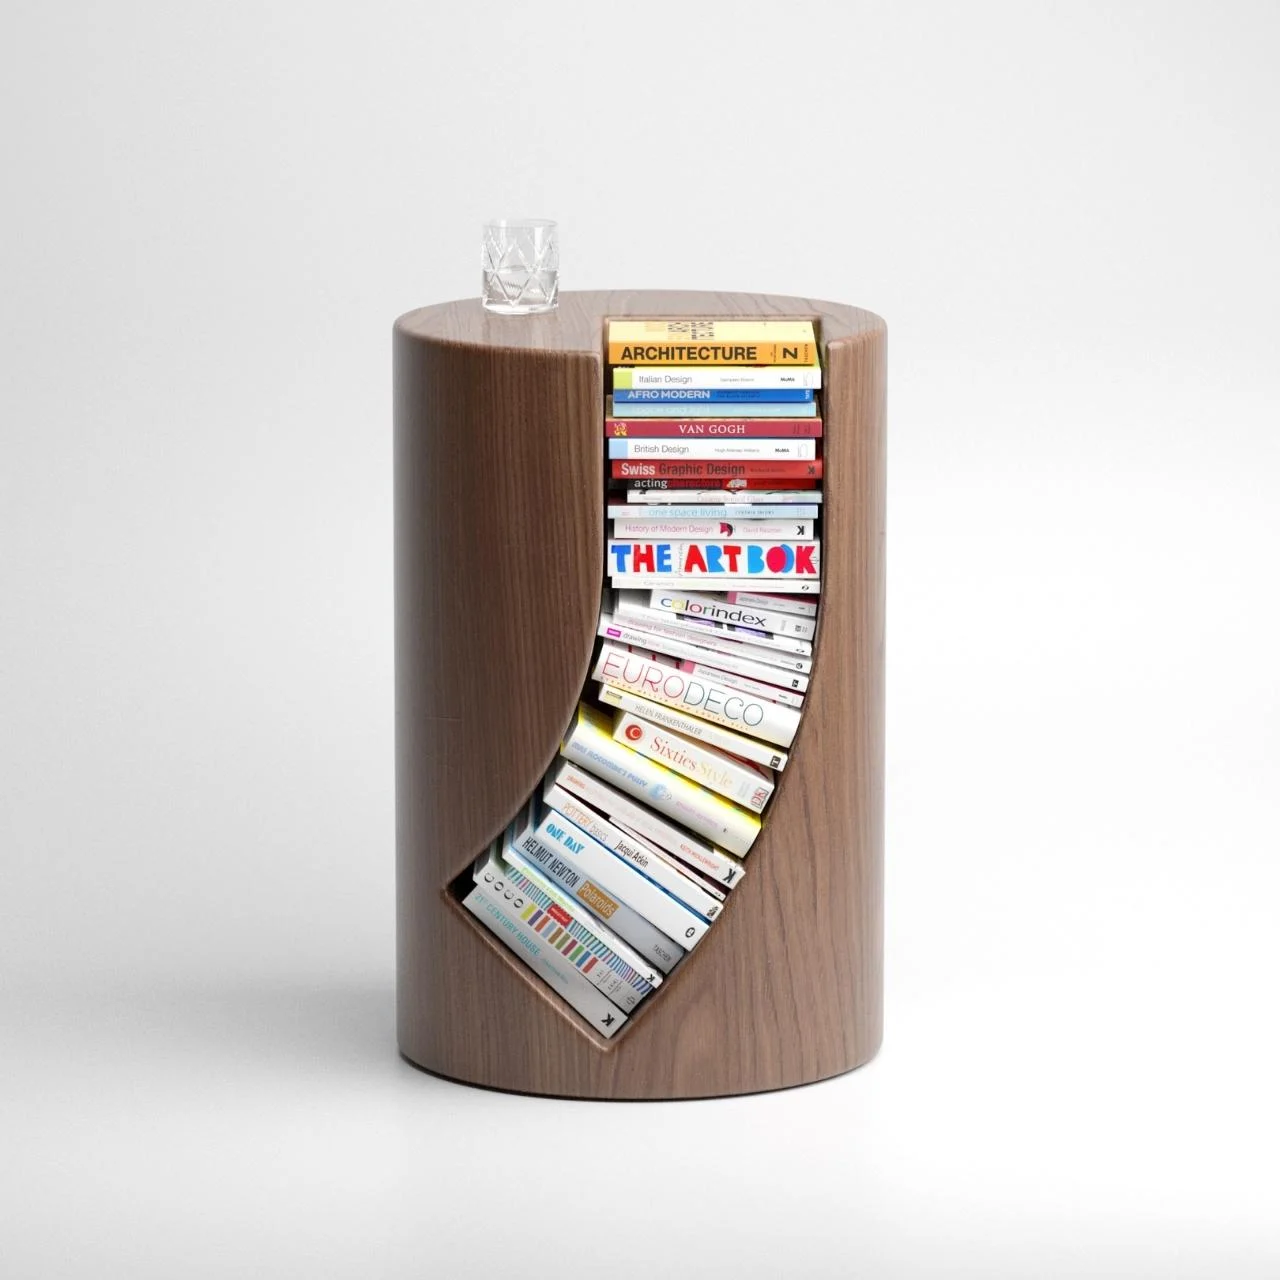 Bookgroove - Unique Bookshelf and Side Table in One